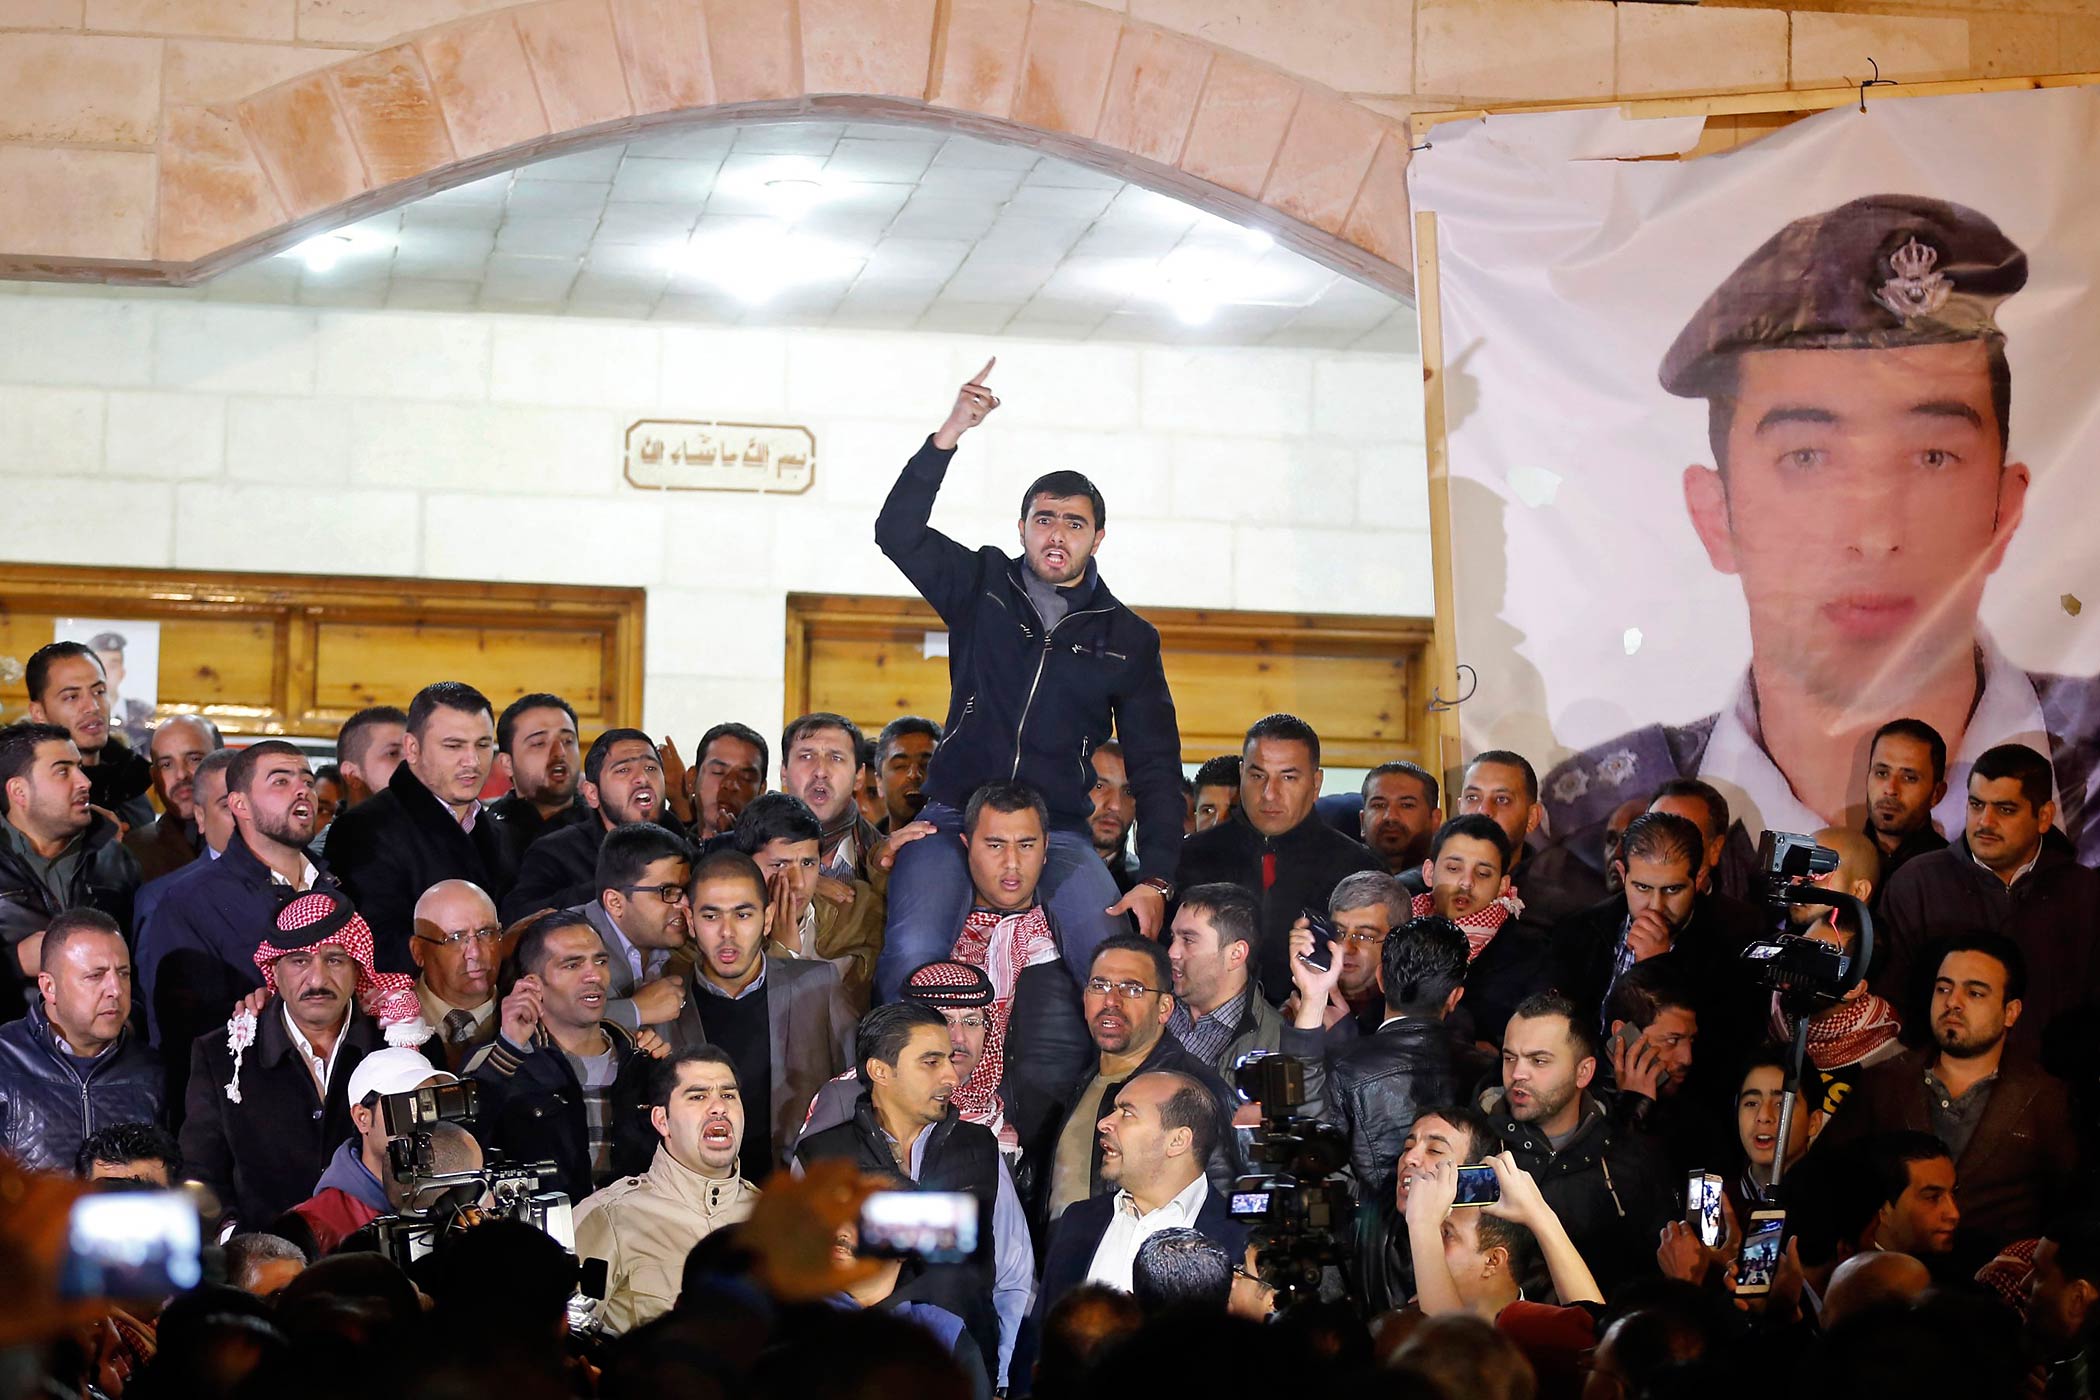 Supporters and family members of Jordanian pilot Moaz al-Kasasbeh at the tribal gathering chamber in Amman, Jordan, express their anger at his reported killing on Feb. 3, 2015 (Raad Adayleh—AP)